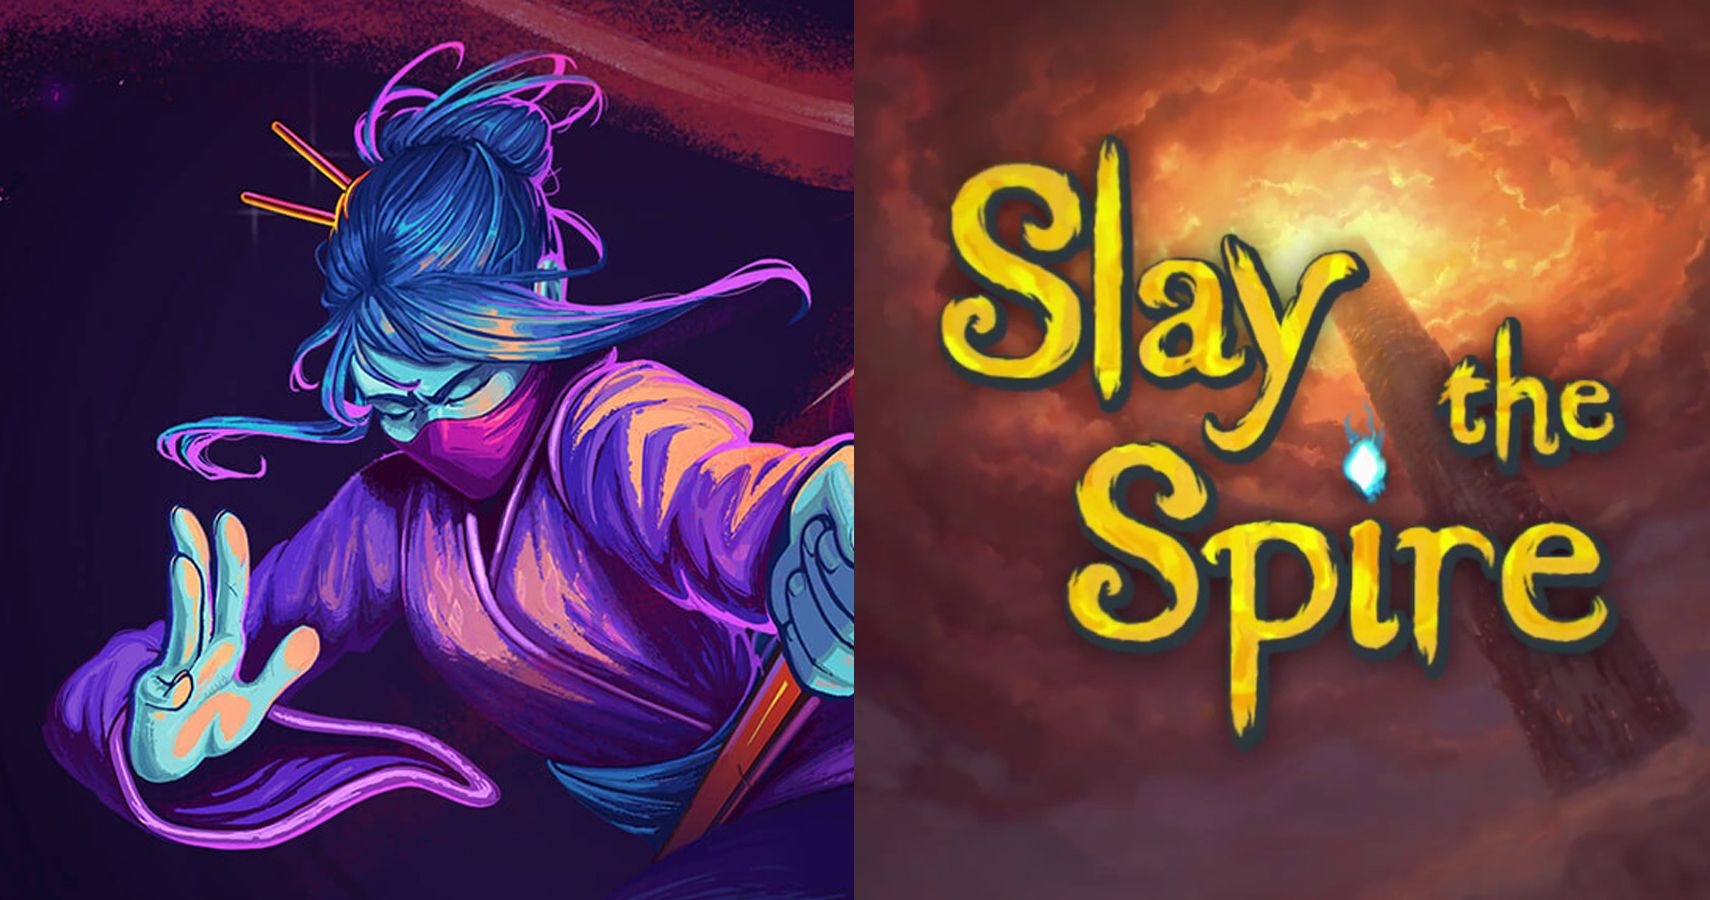 Pro Tips For Slay The Spire You Should Know